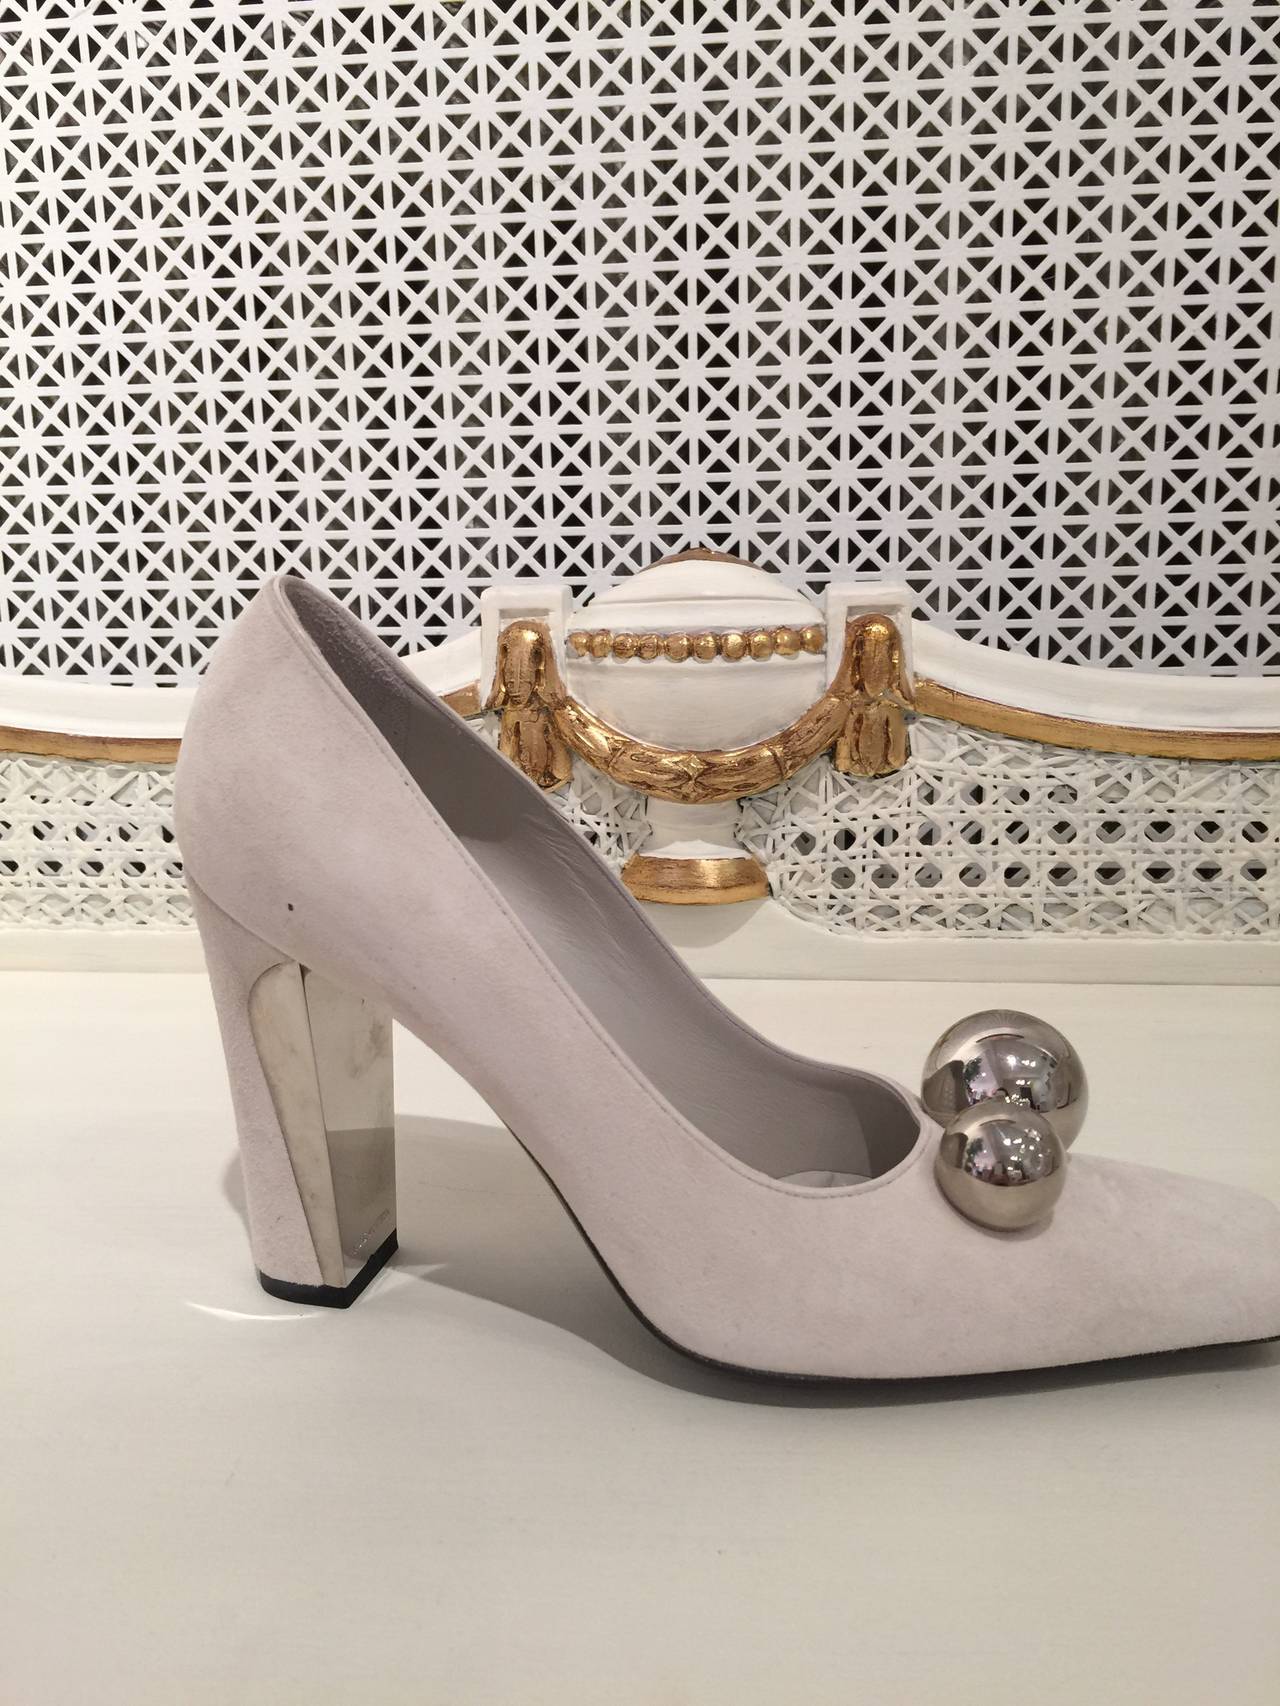 Elegant louis Vuitton Pumps...in white suede...
timeless and elegant...
with siver balls embellishment, square toe and silver plate at the heel
Impeccable with box